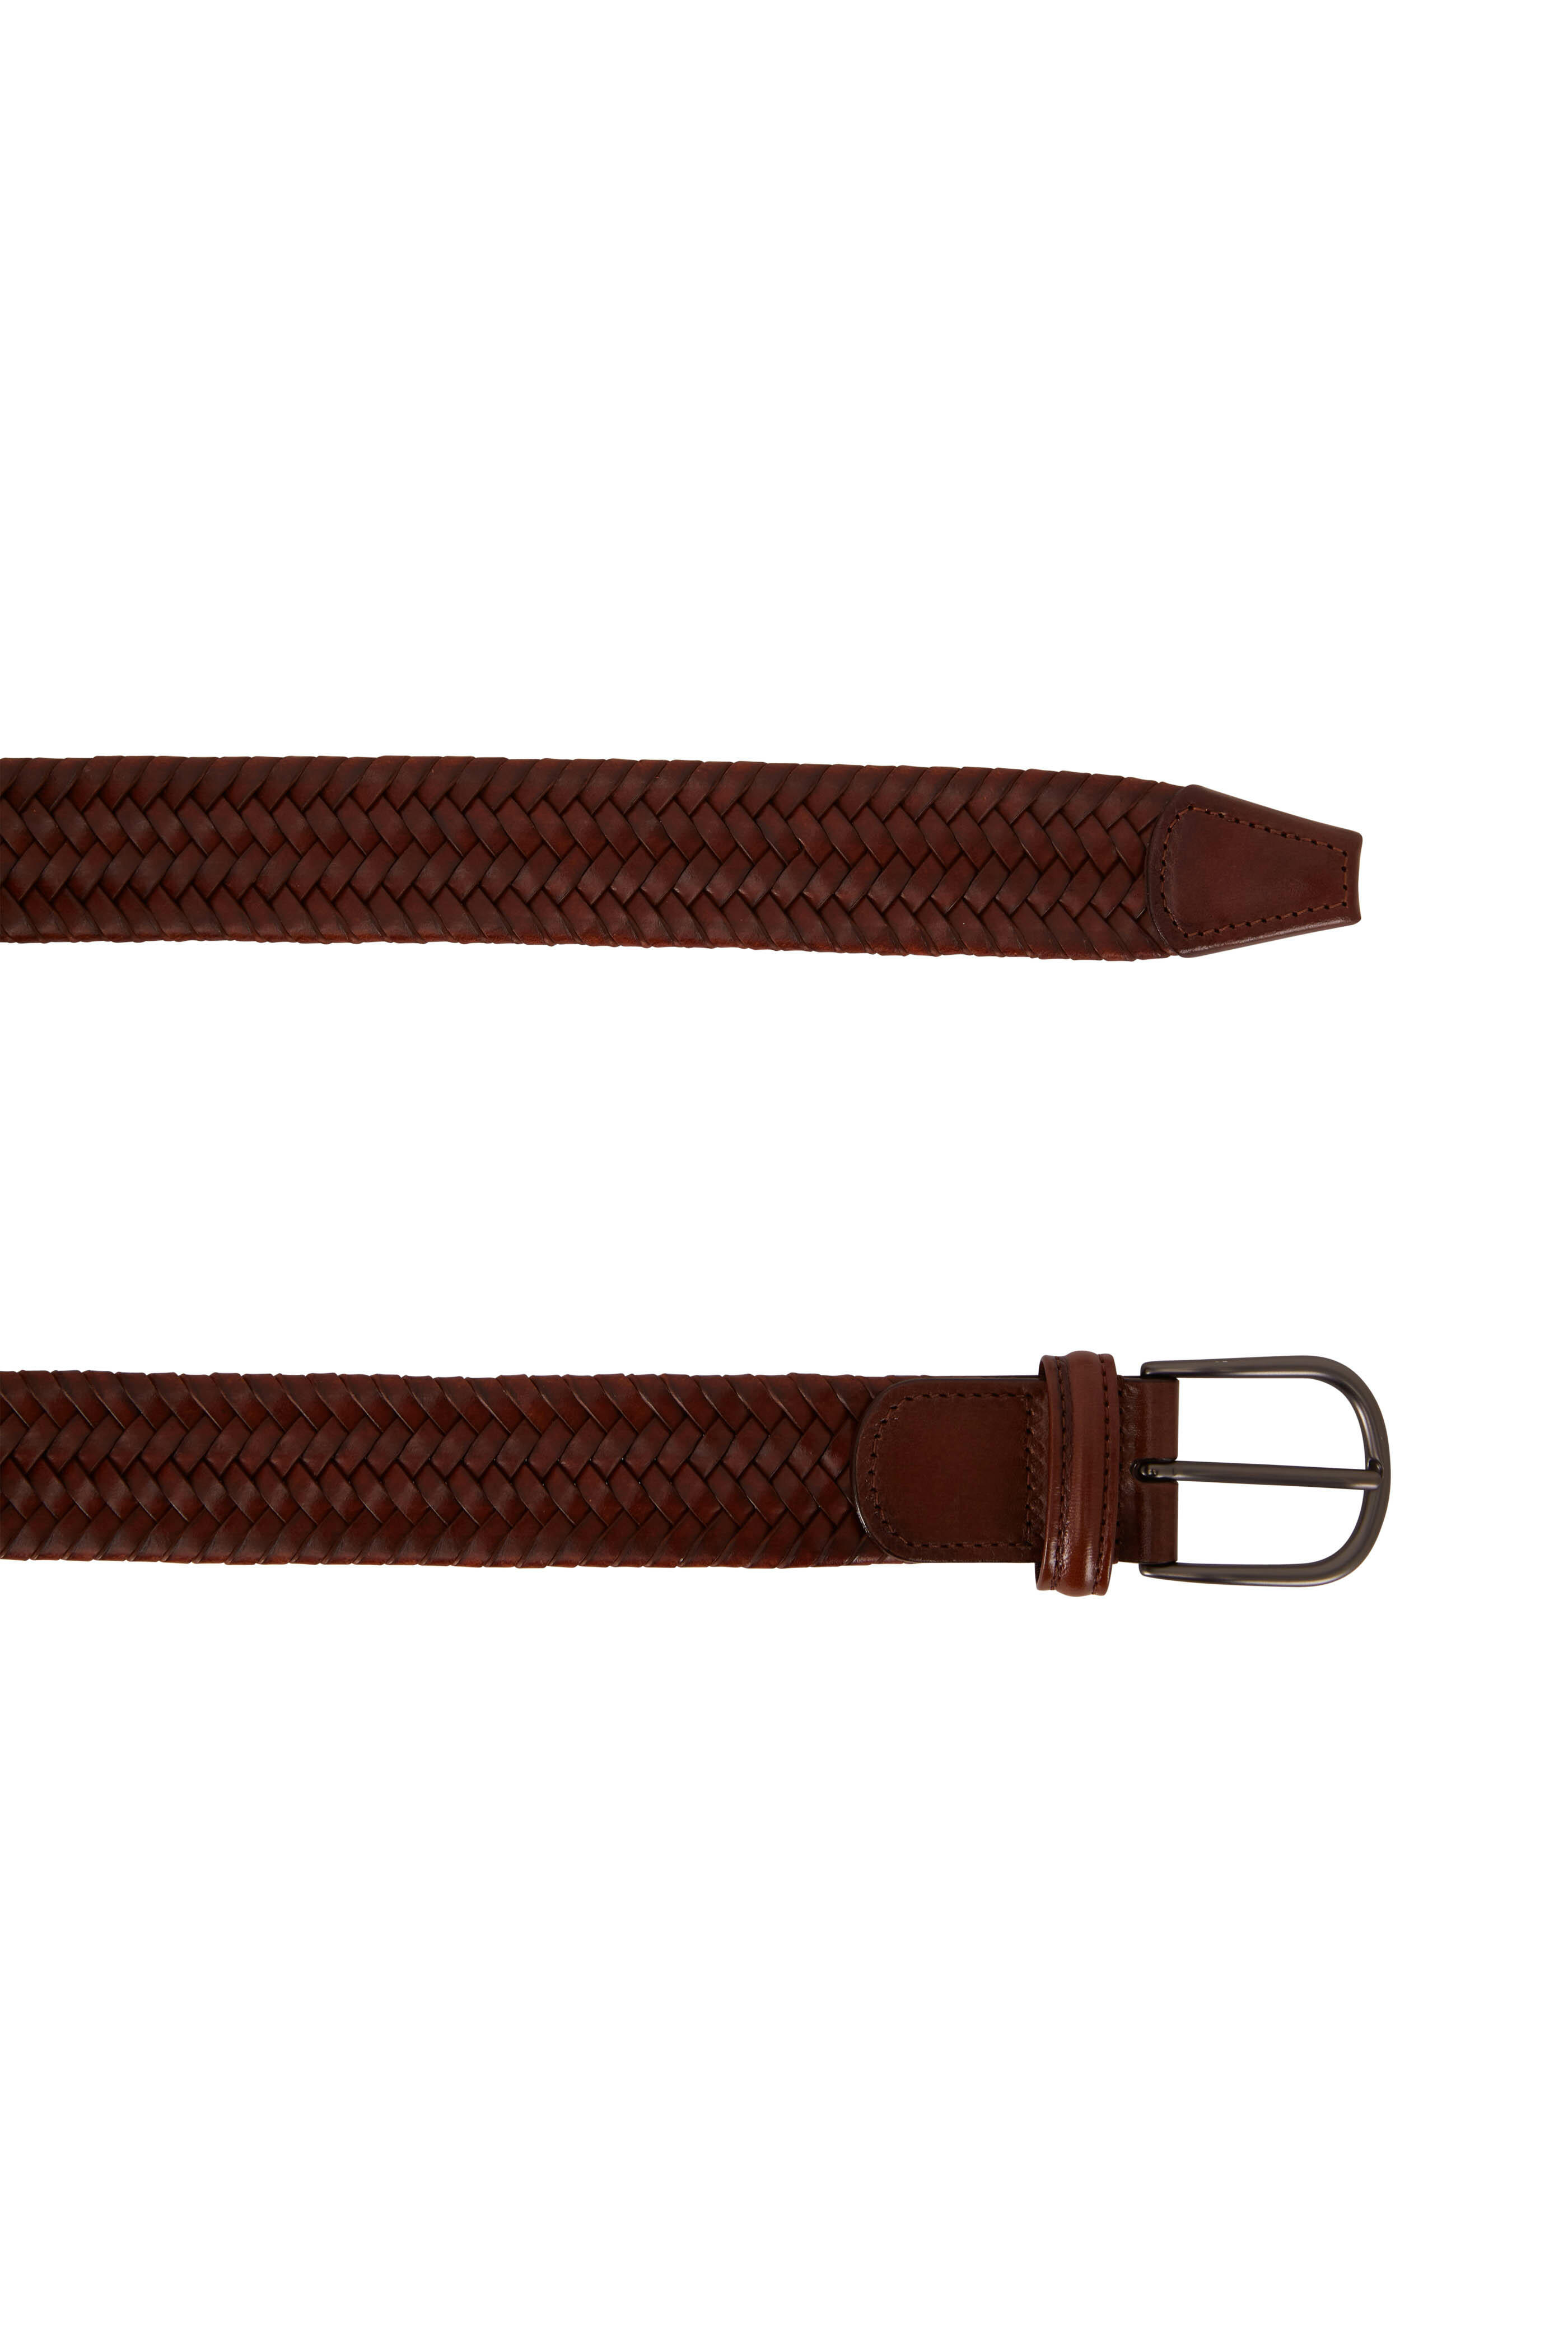 Anderson's Woven Leather Belt in Dark Brown